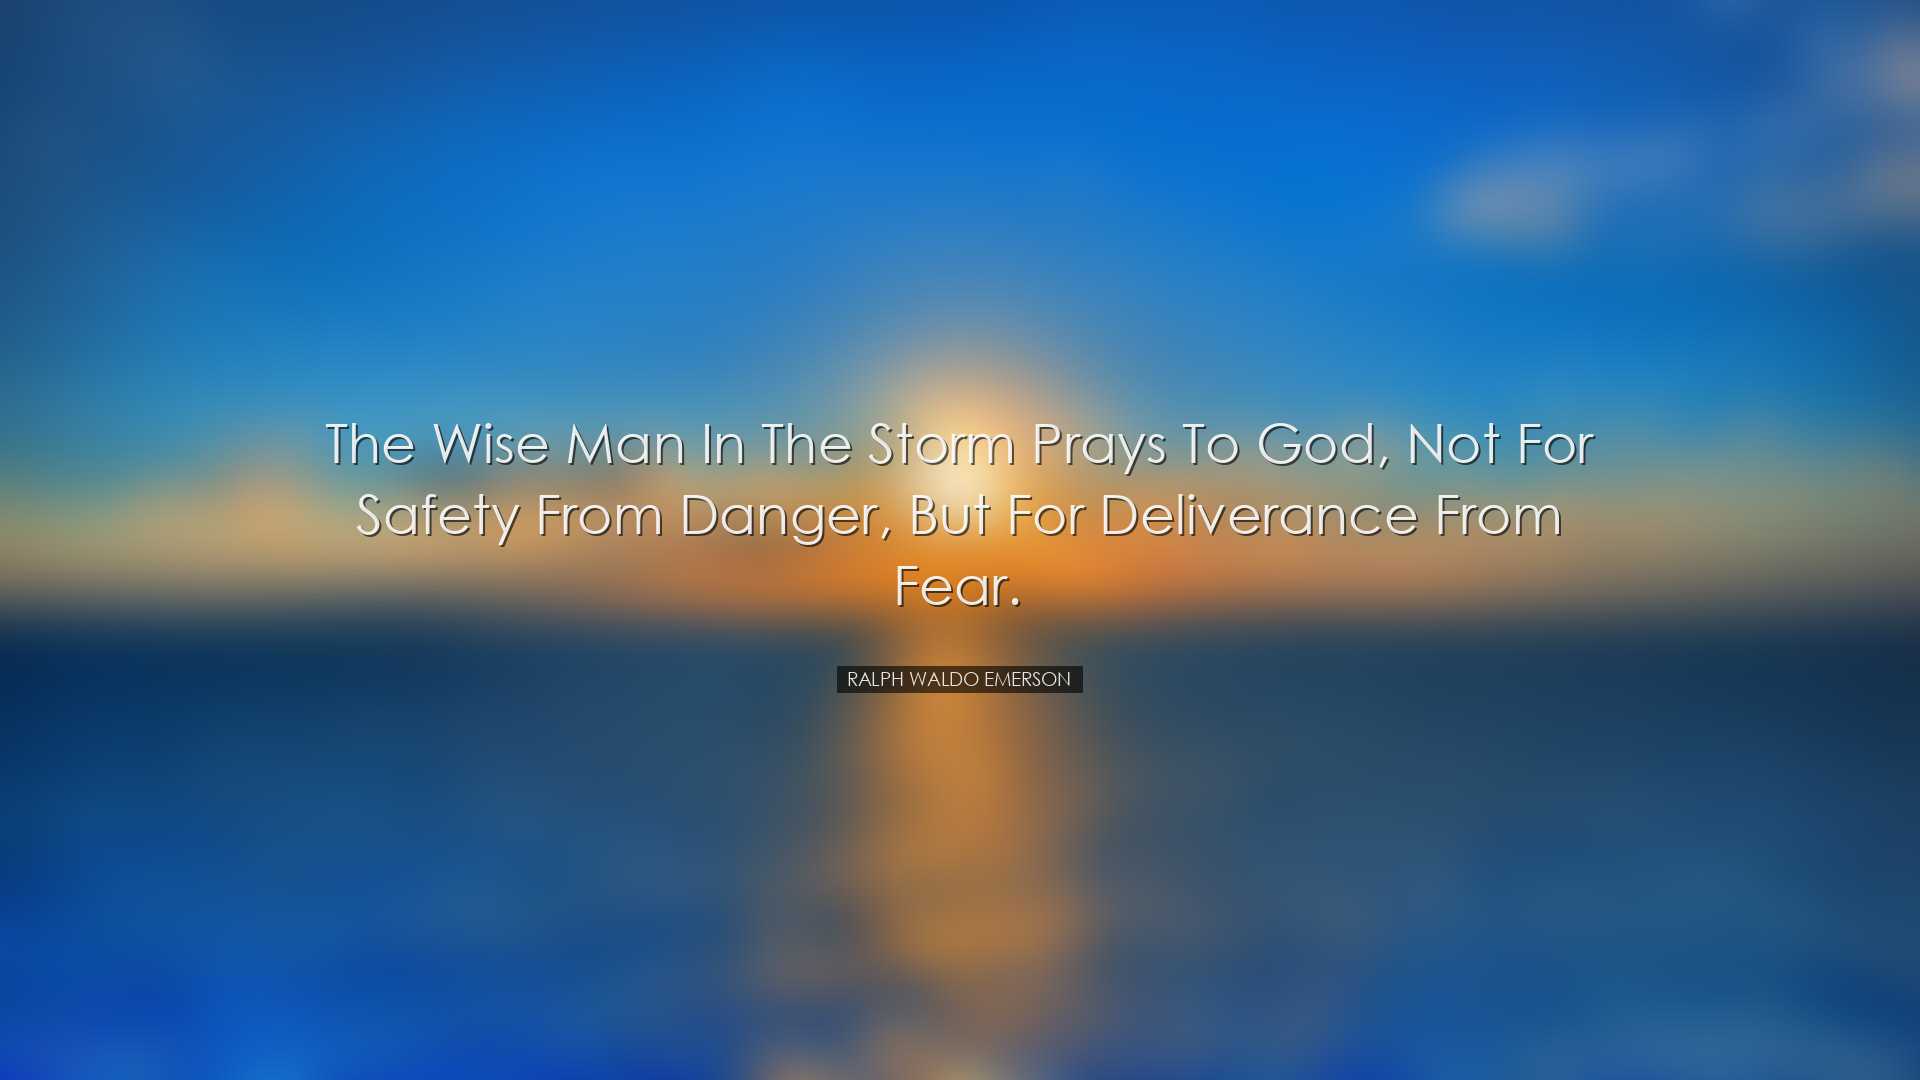 The wise man in the storm prays to God, not for safety from danger